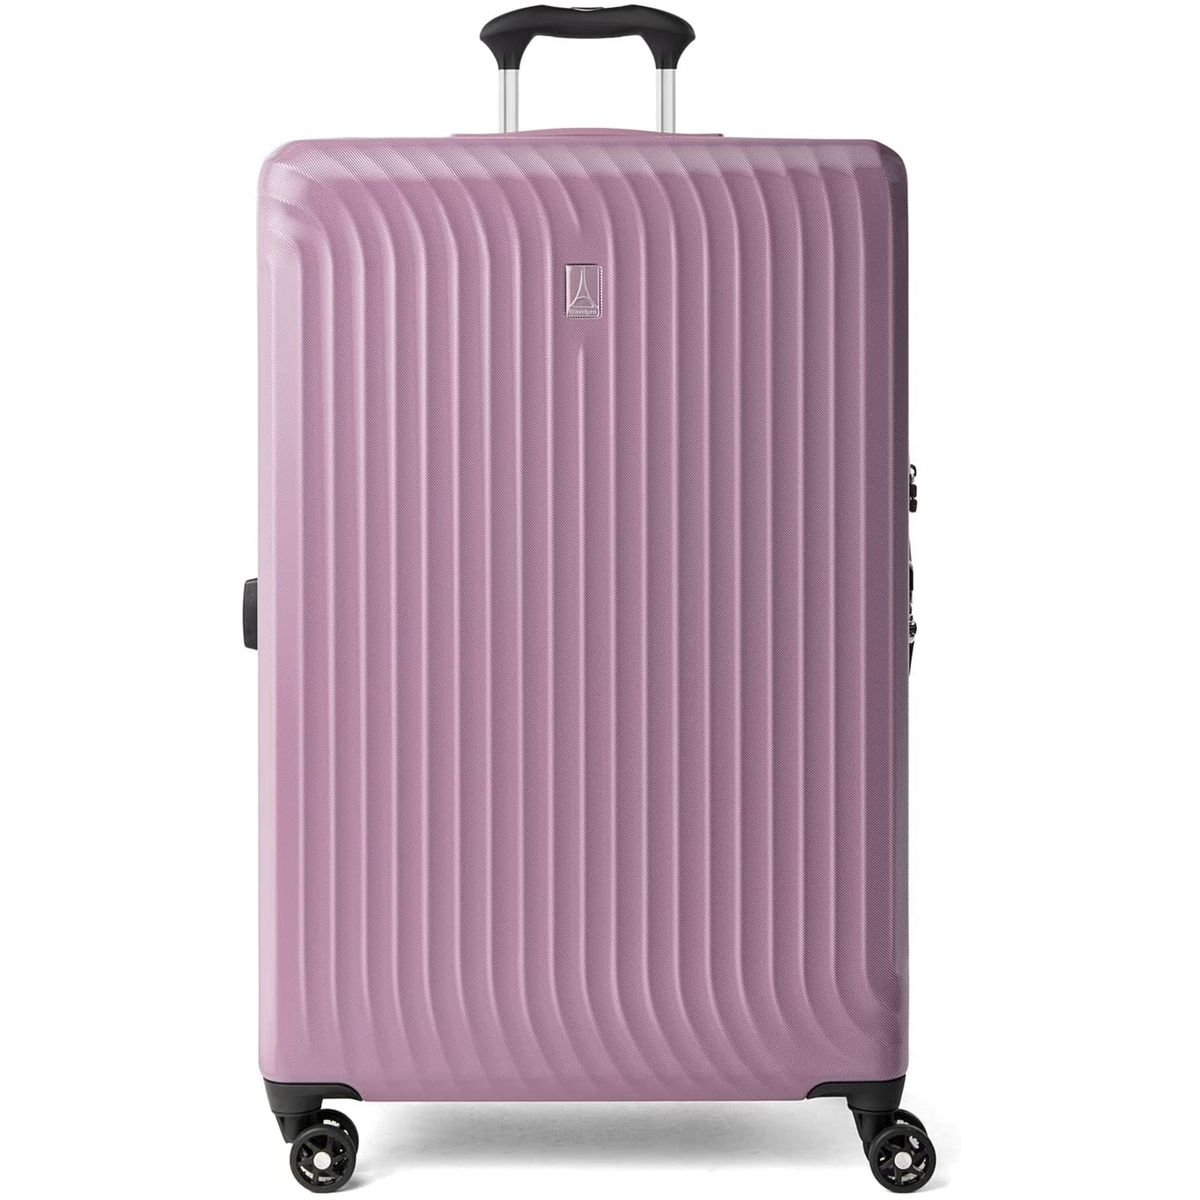 Travelpro Maxlite Air Hardside Expandable Luggage, 8 Spinner Wheels